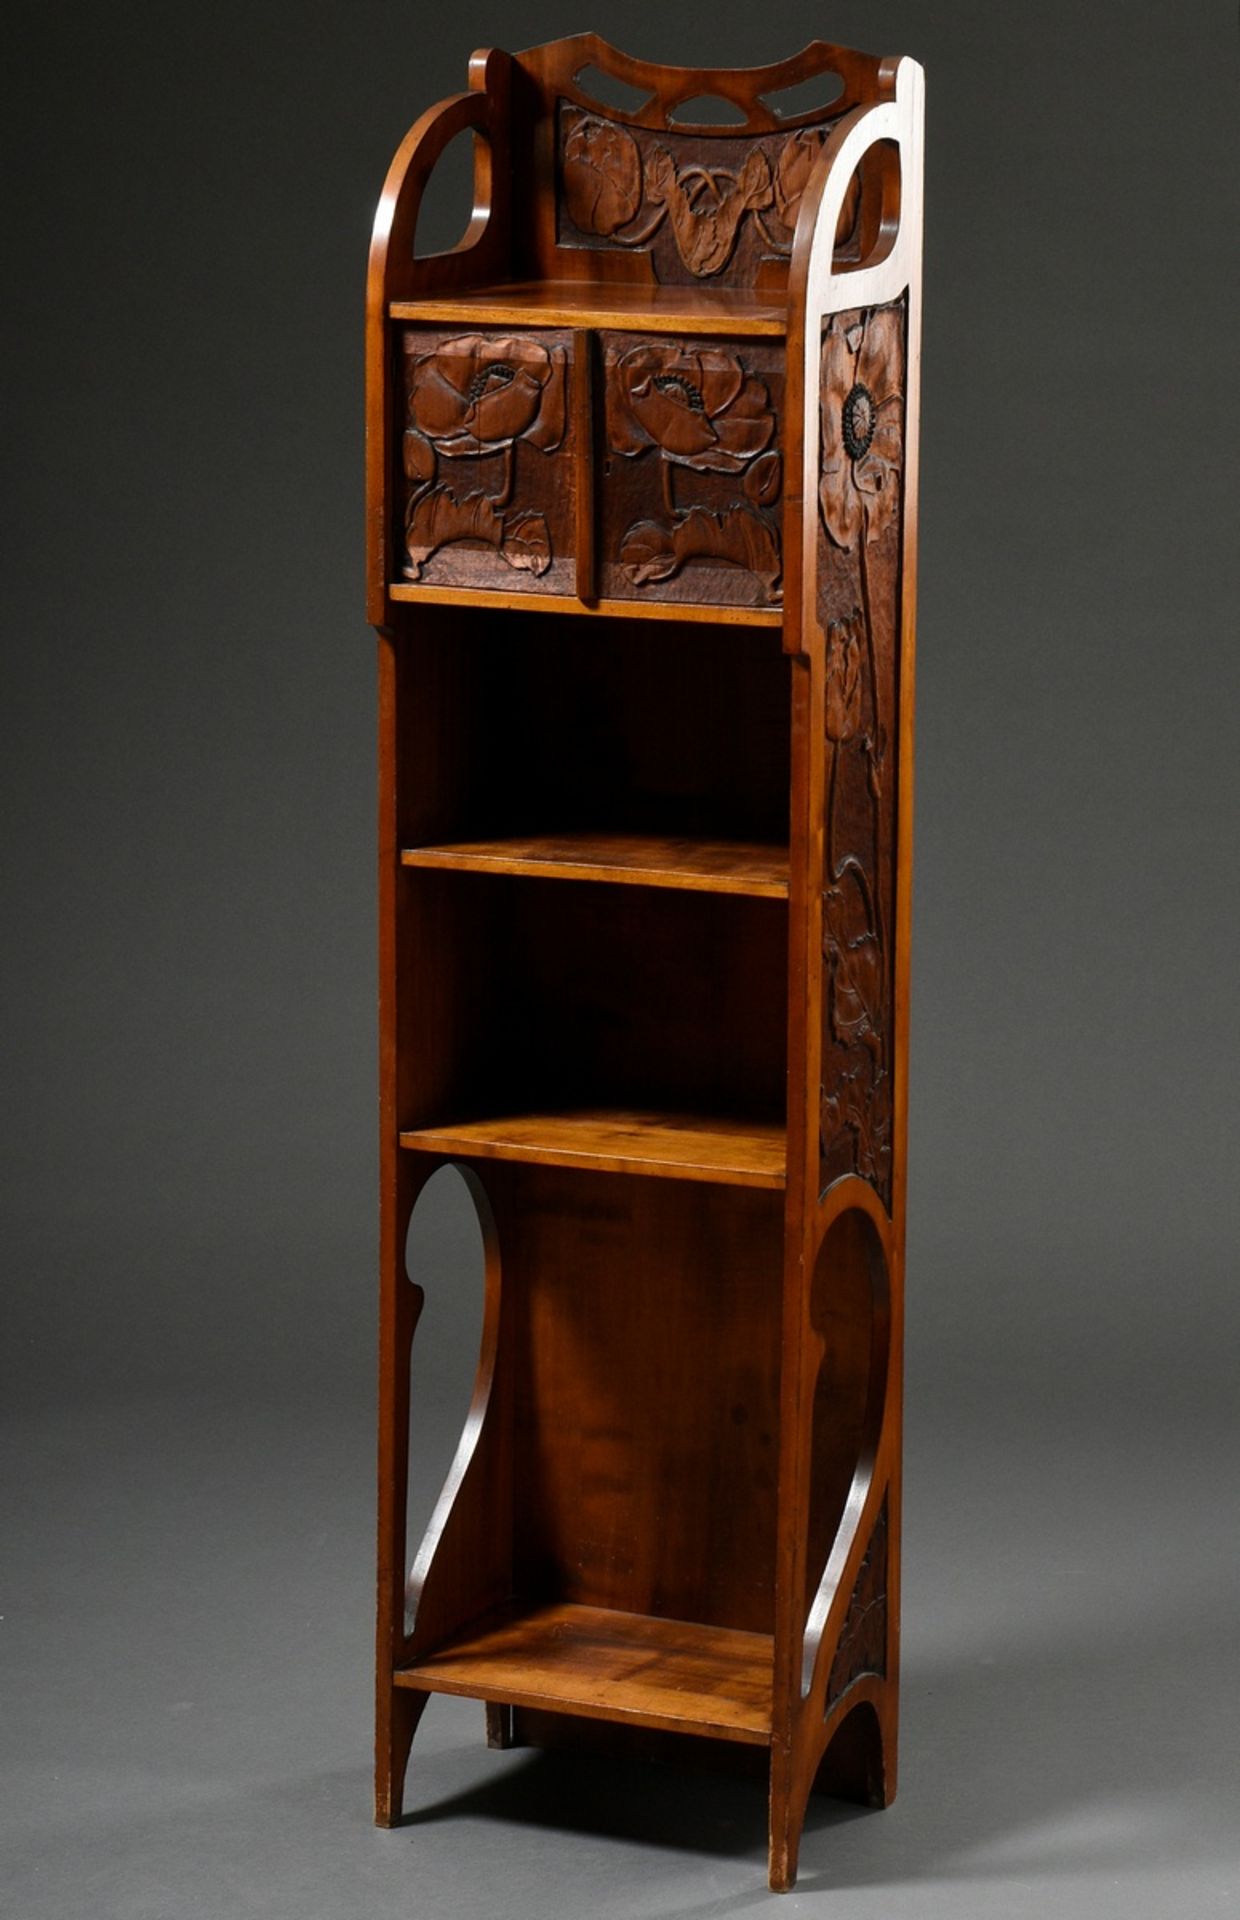 Narrow Art Nouveau shelf with two-door compartment and ornamentally carved frame as well as "poppy